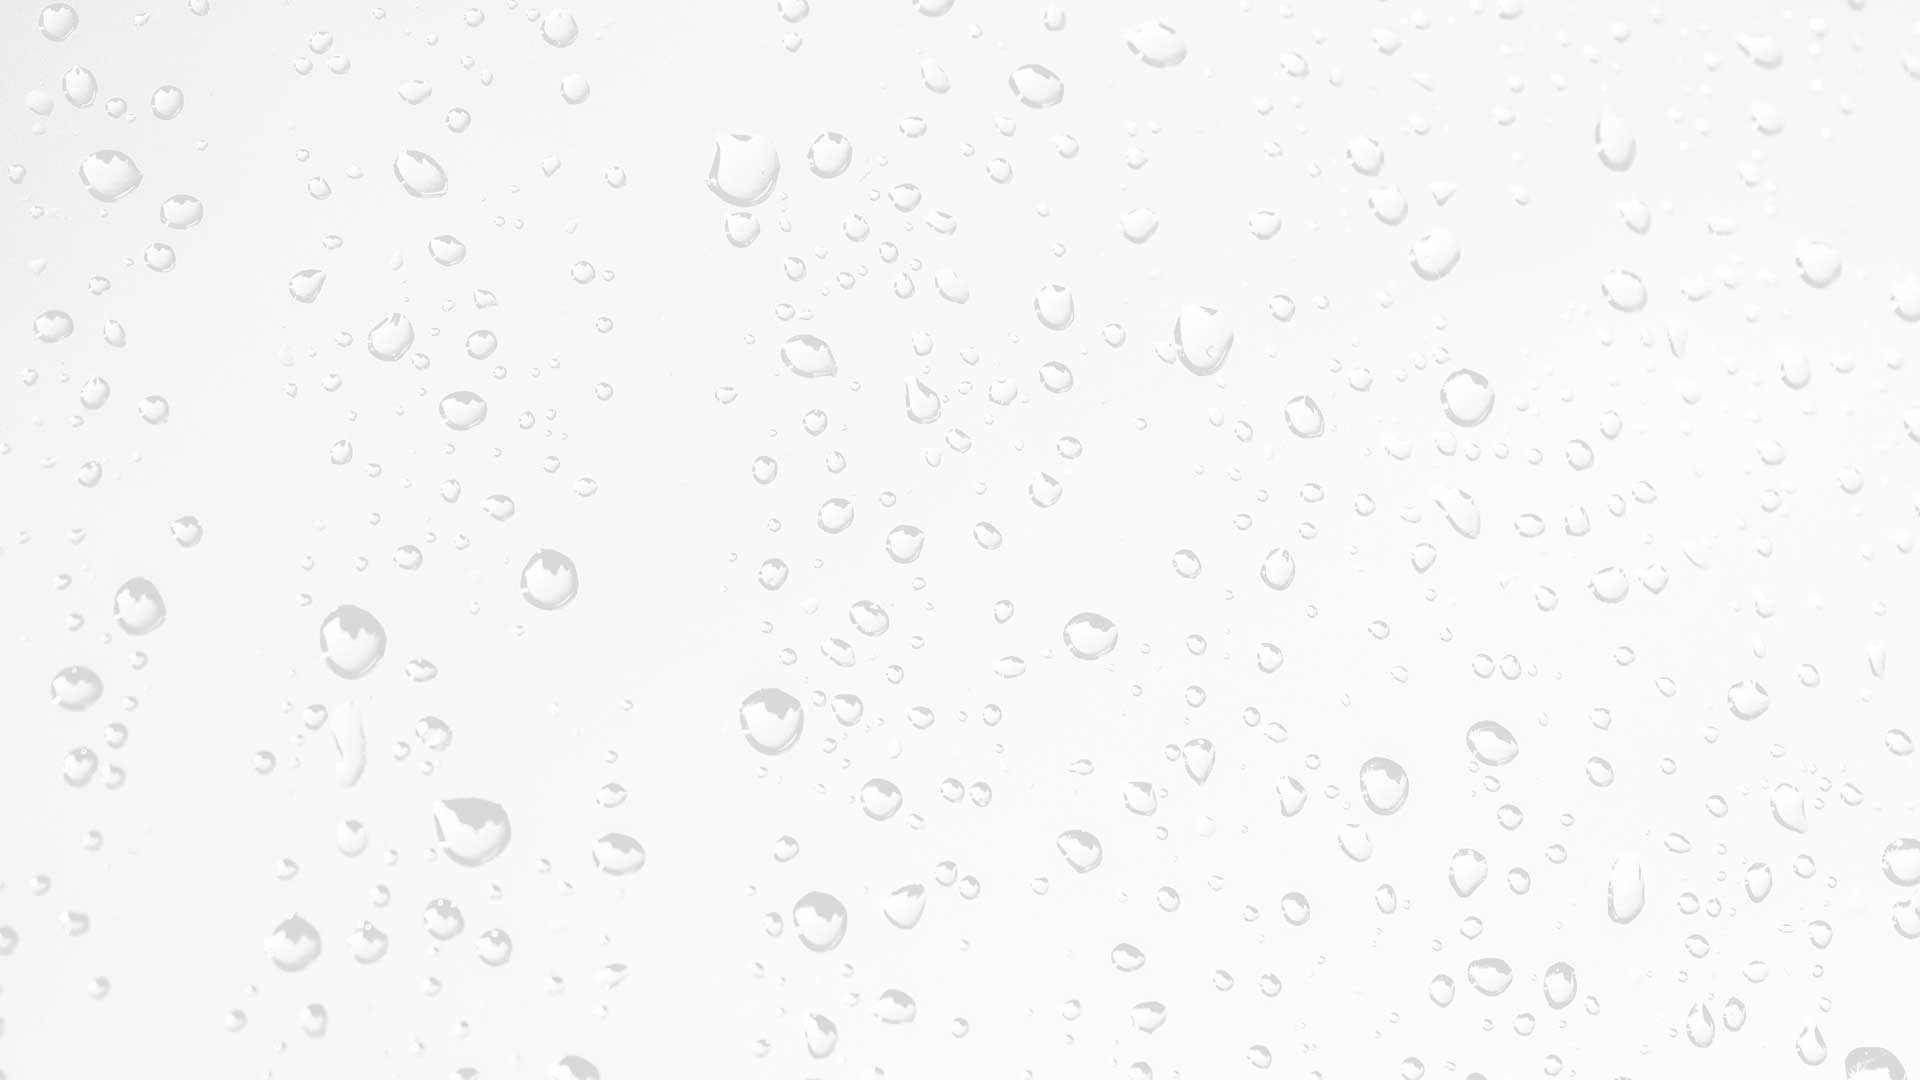 Water Droplet Background Image